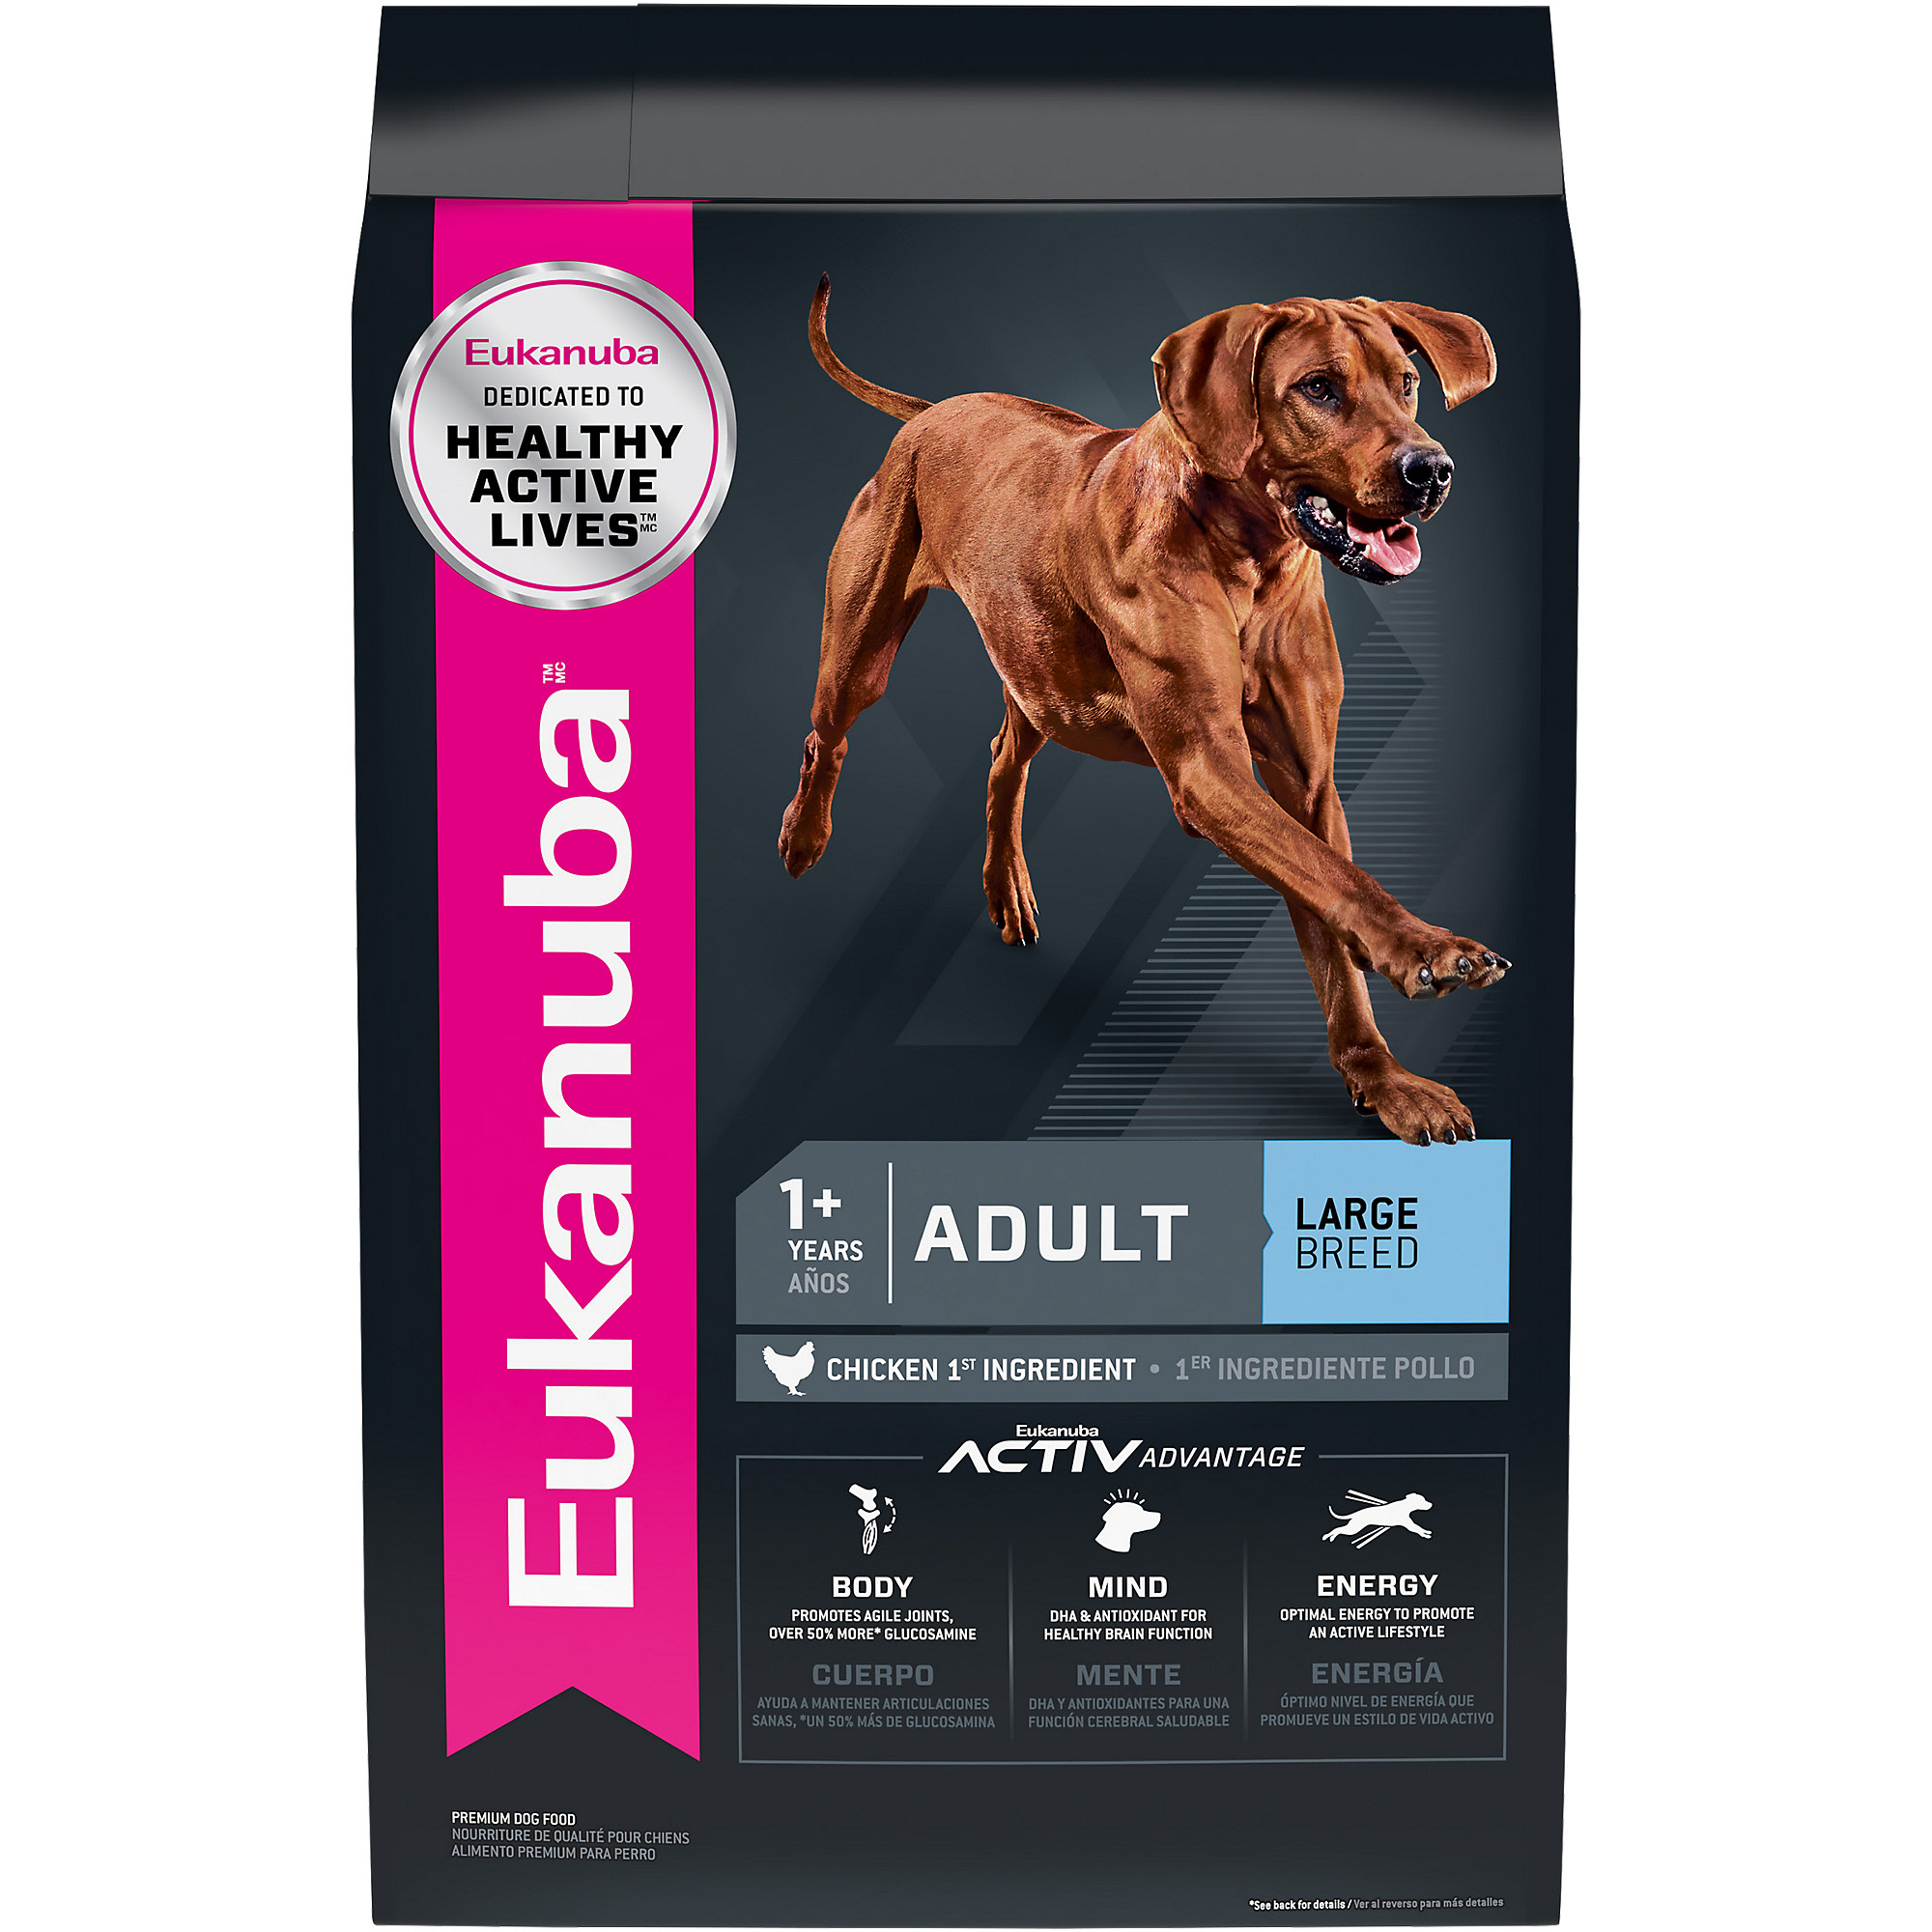 excentrisk ankomme arm Eukanuba Dog Food Products | Petco